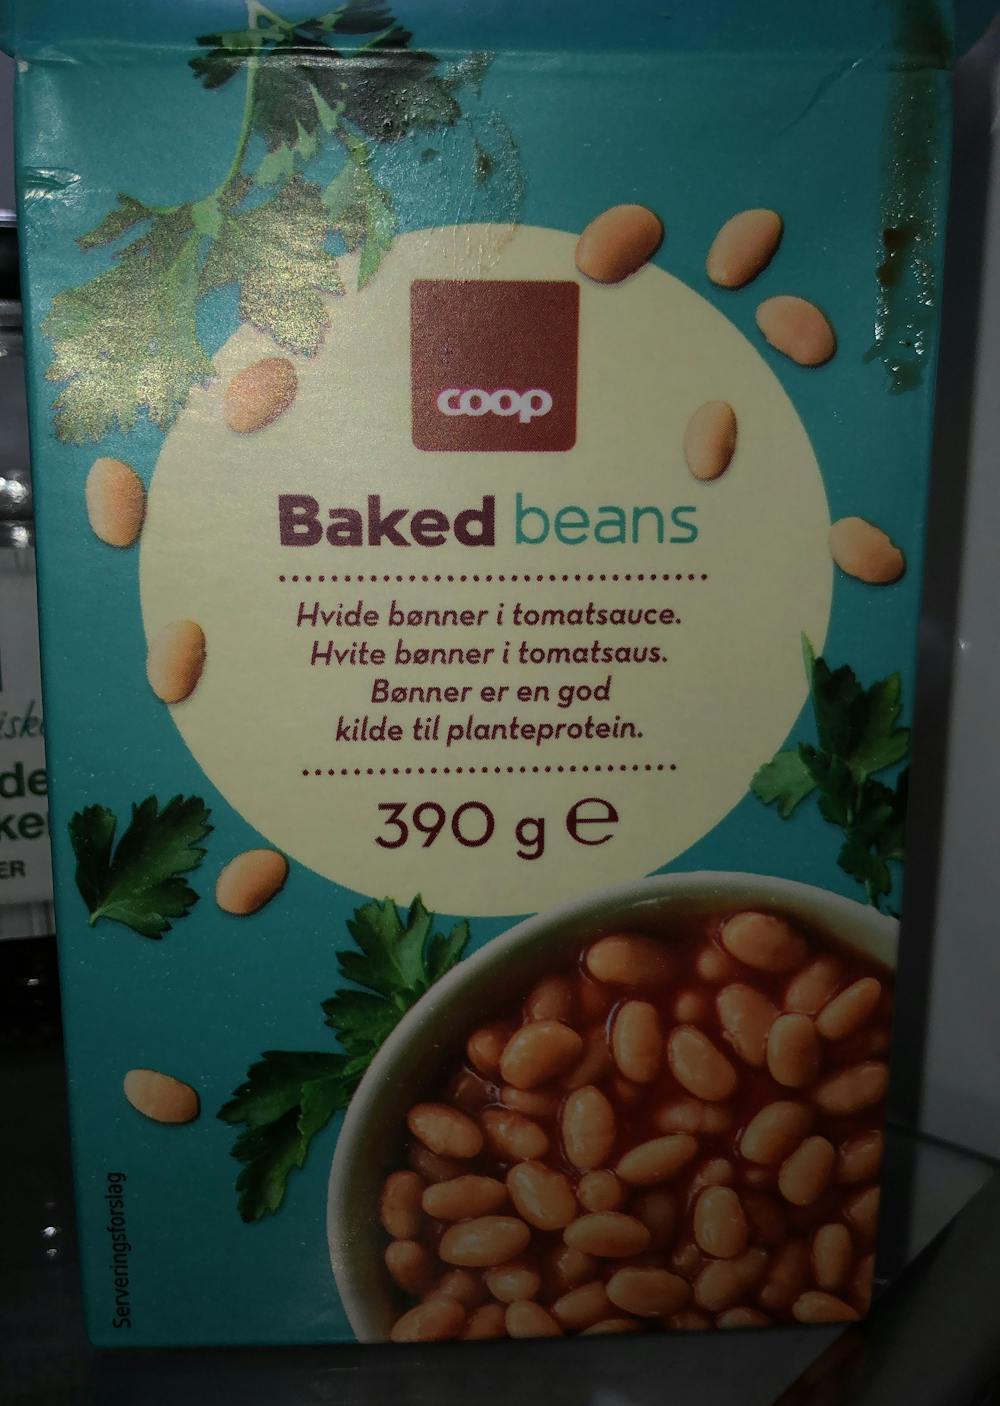 Baked beans, Coop